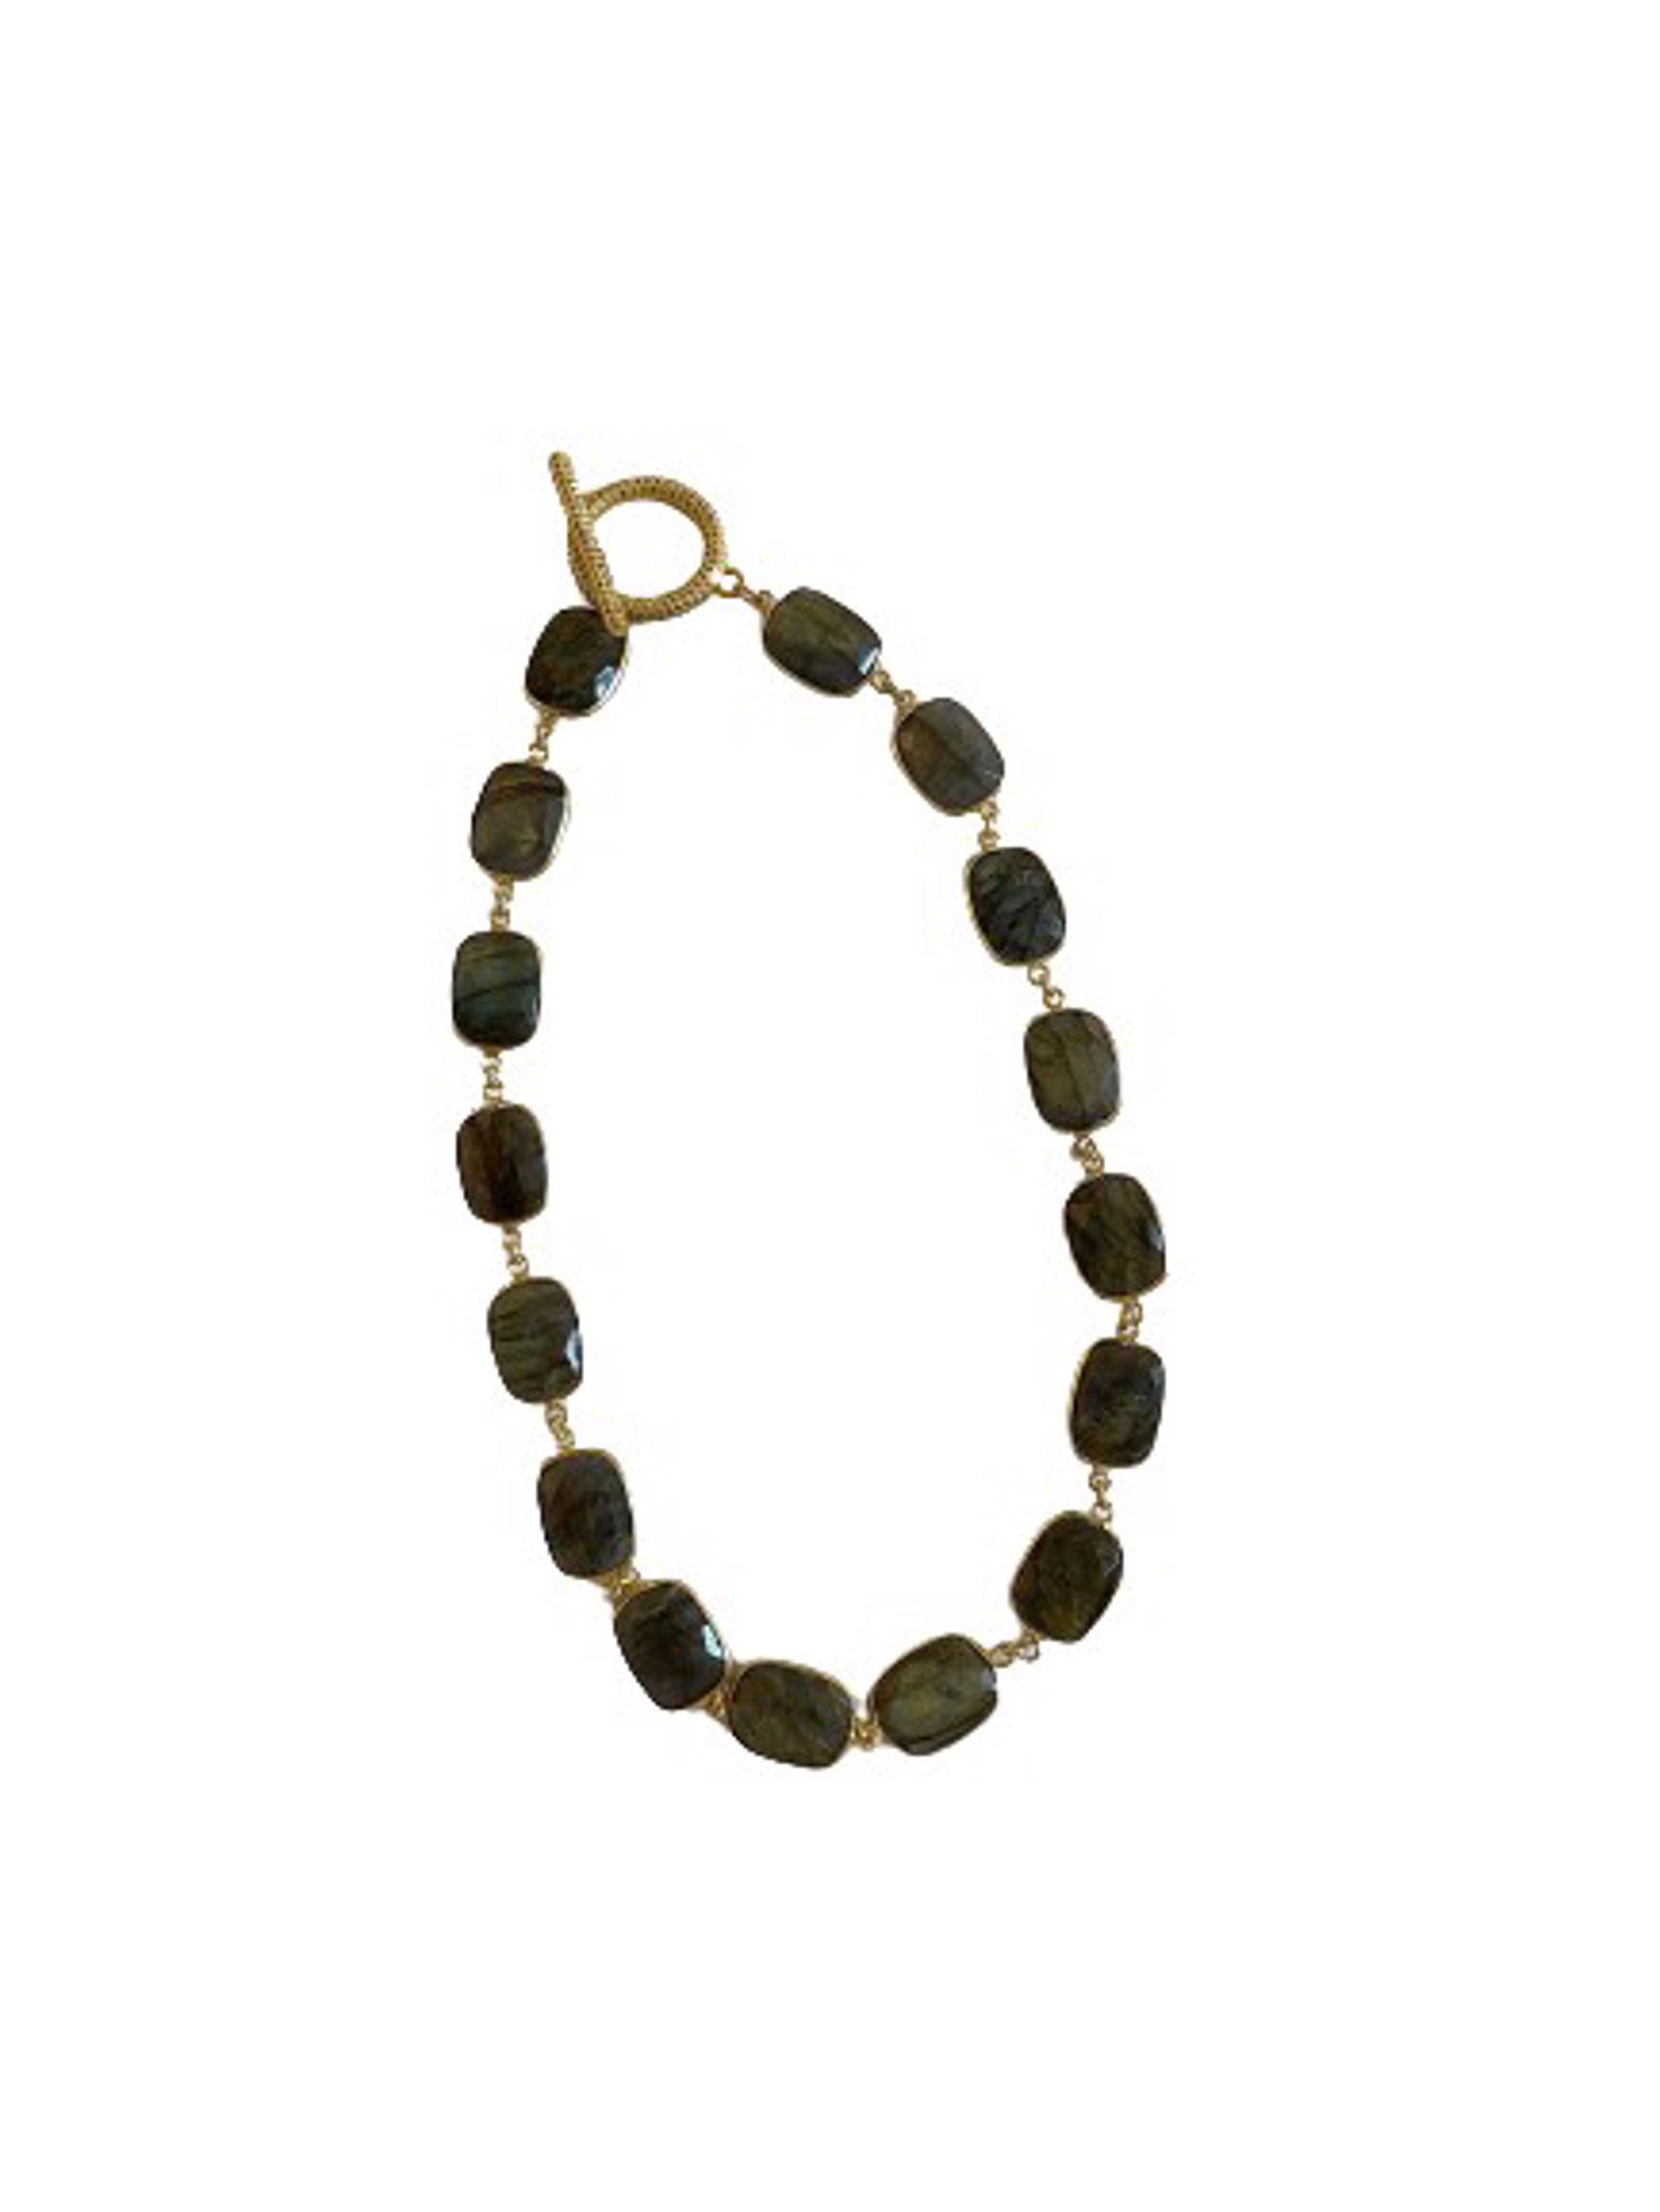 Gold Vermeil and Labradorite Rectangle Shaped Bezel Necklace with Large Gold Vermeil Pave Diamond Toggle Clasp by Karen Birchmier